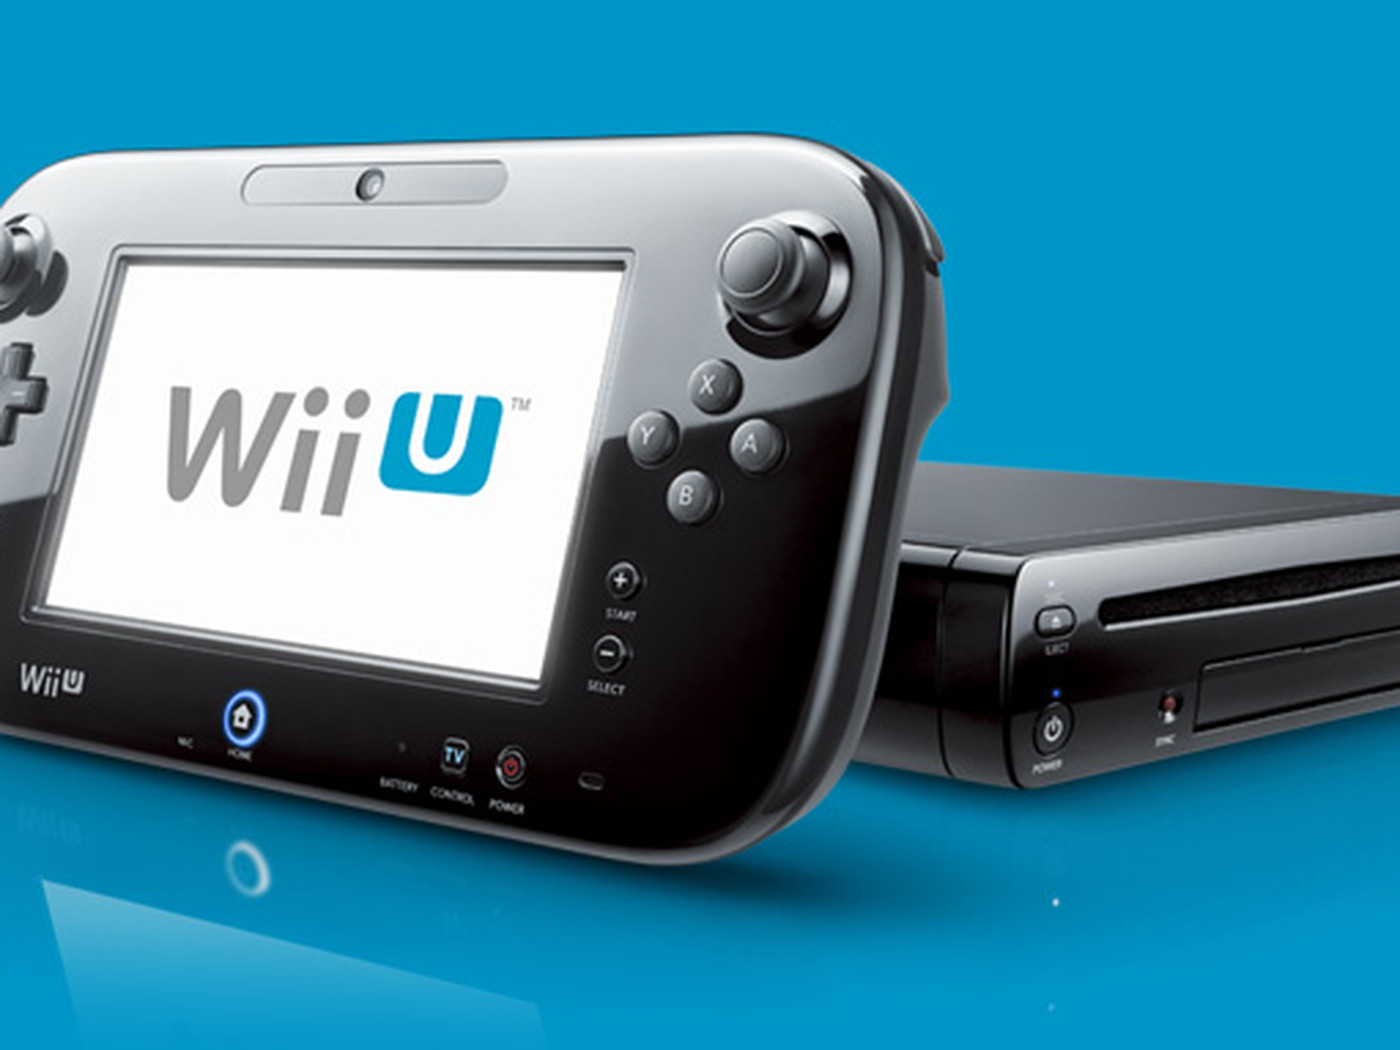 Theseus hjælper Munk Nintendo dropping Wii U Deluxe price to $299.99 Sept. 20 - Polygon